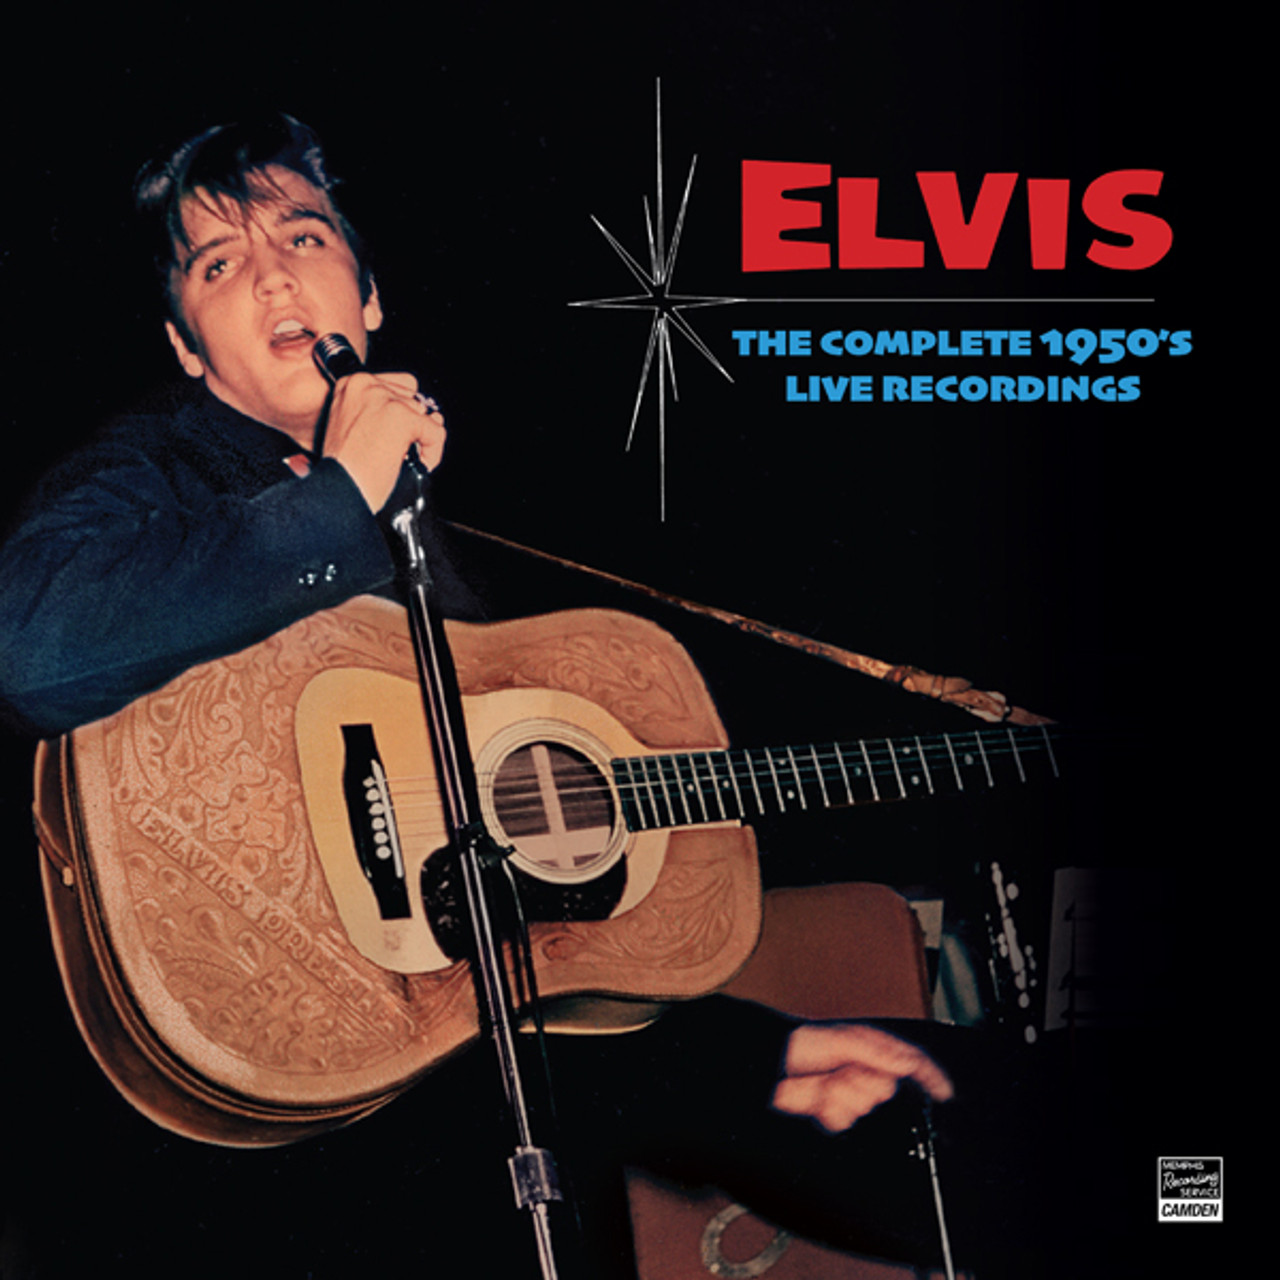 Elvis: The Complete 50s Live Recording 3 CD Set from MRS